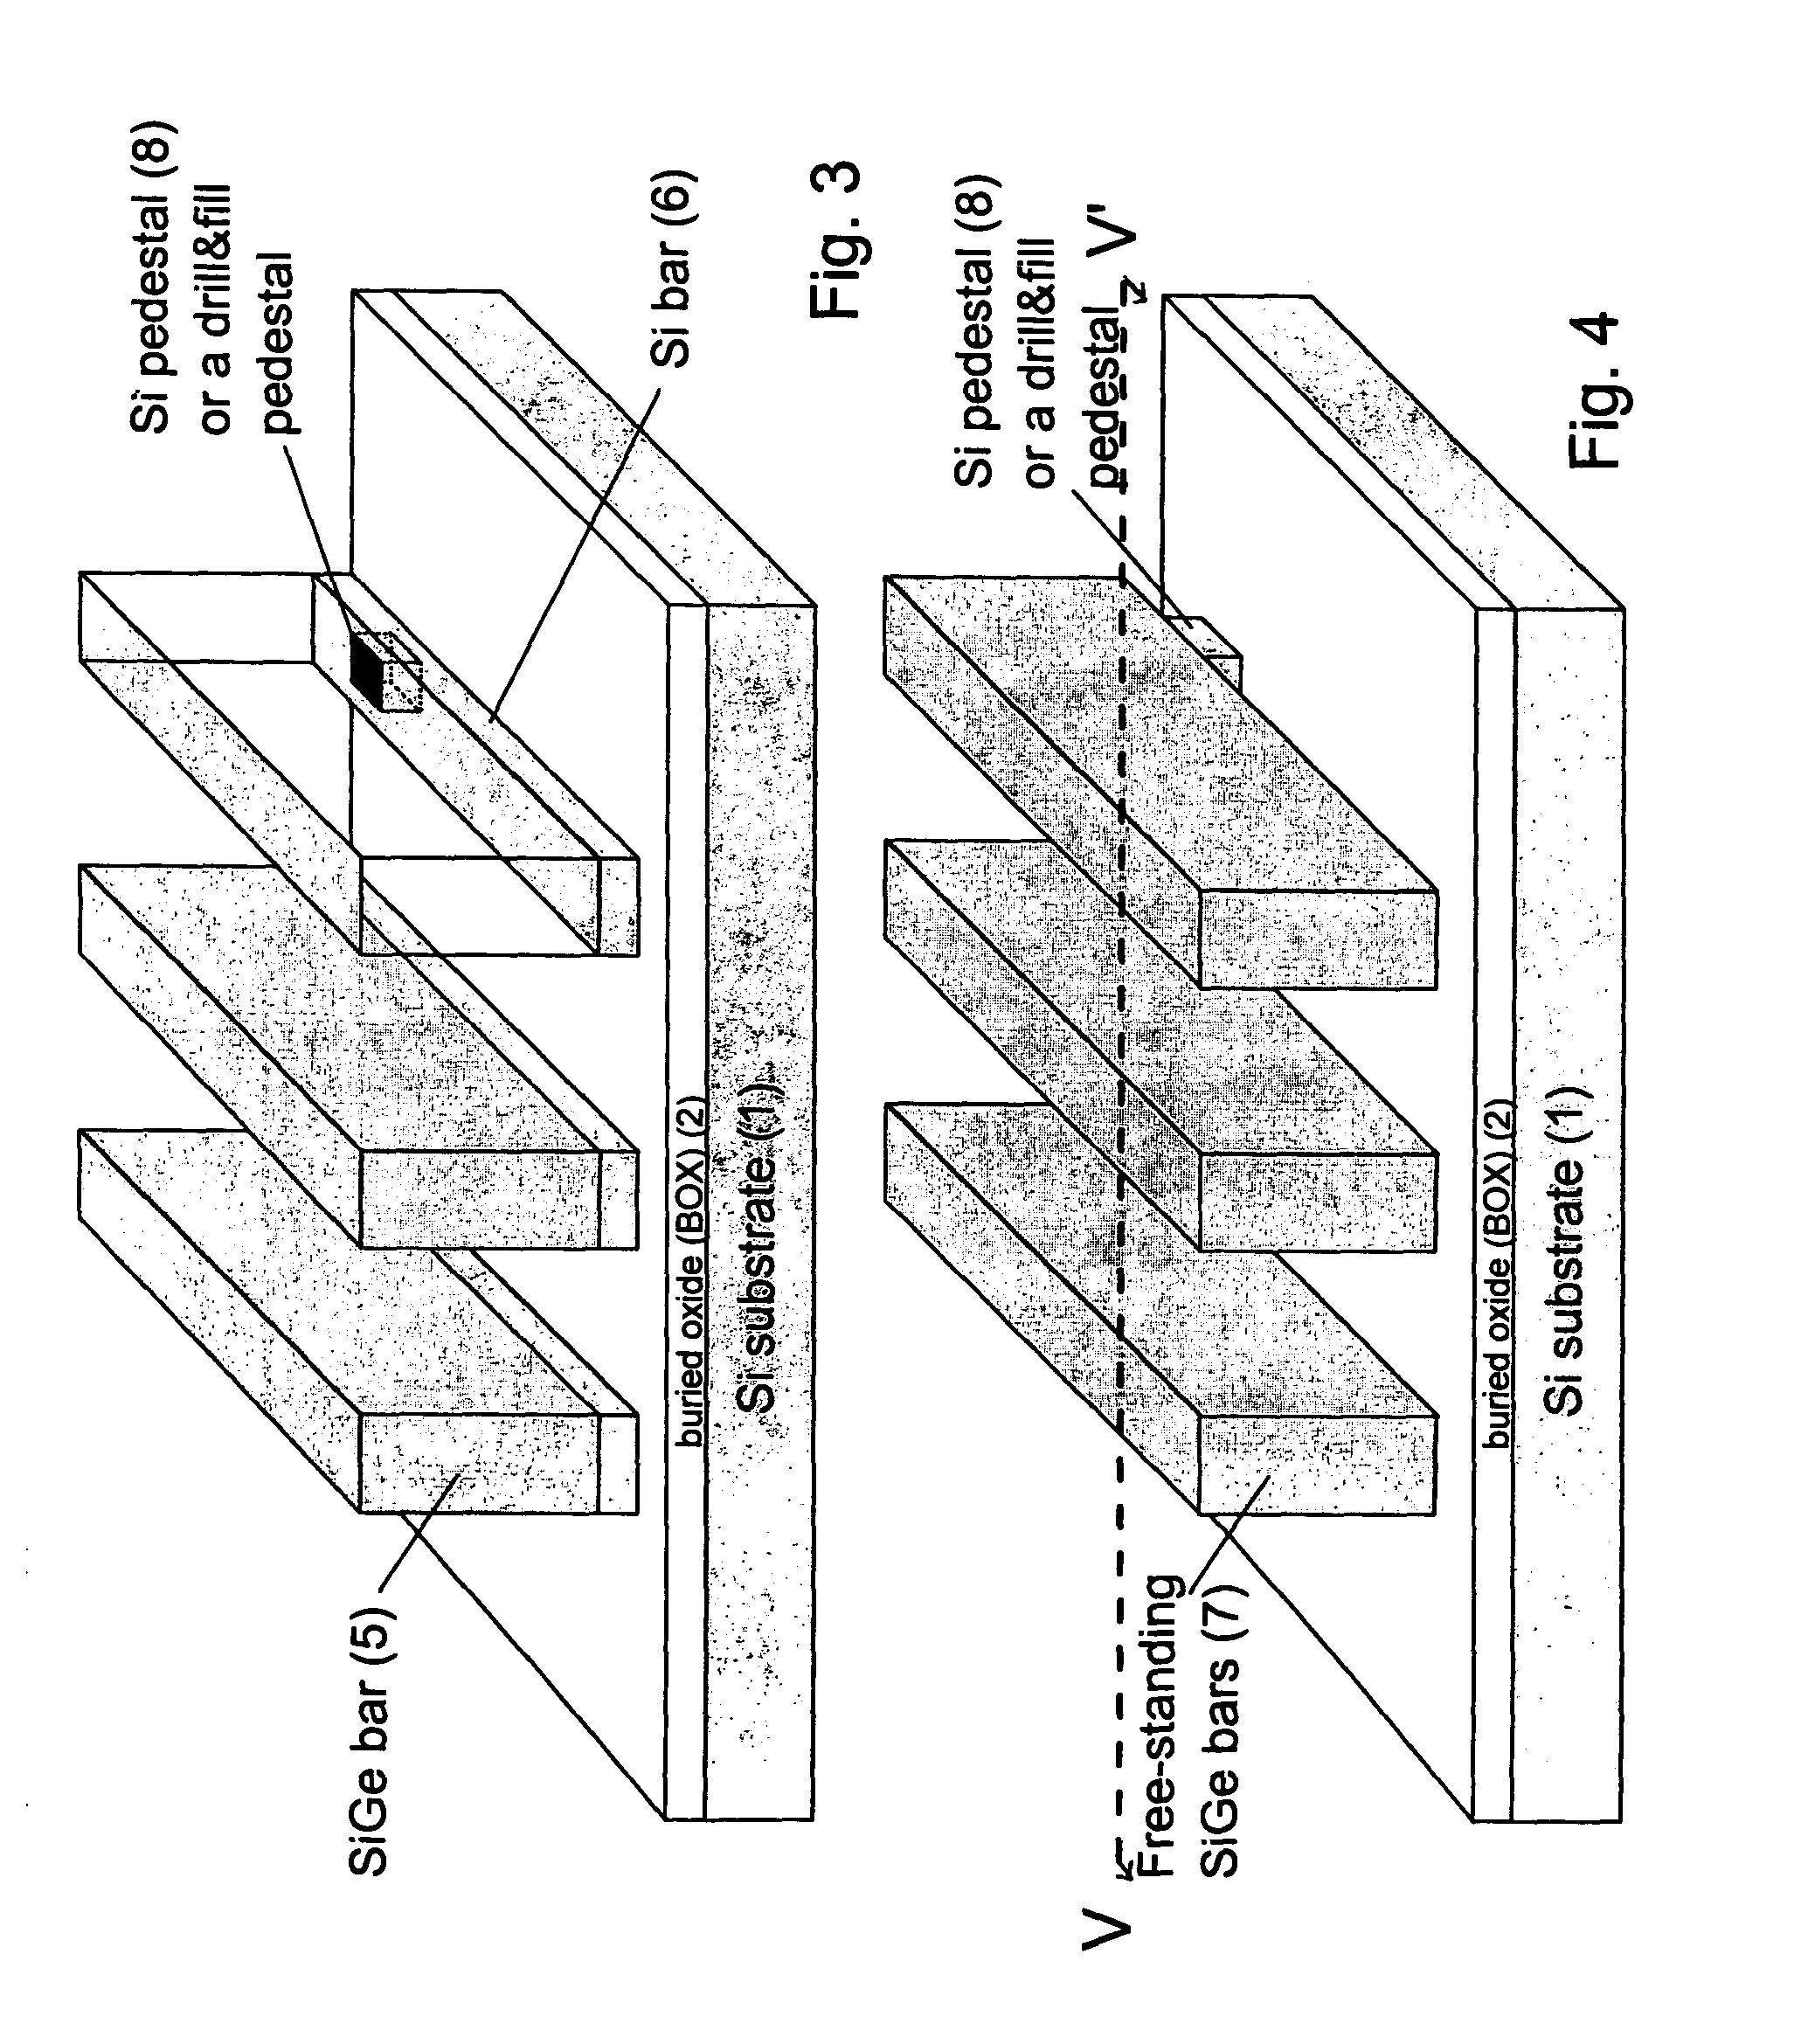 Strained-channel fin field effect transistor (FET) with a uniform channel thickness and separate gates